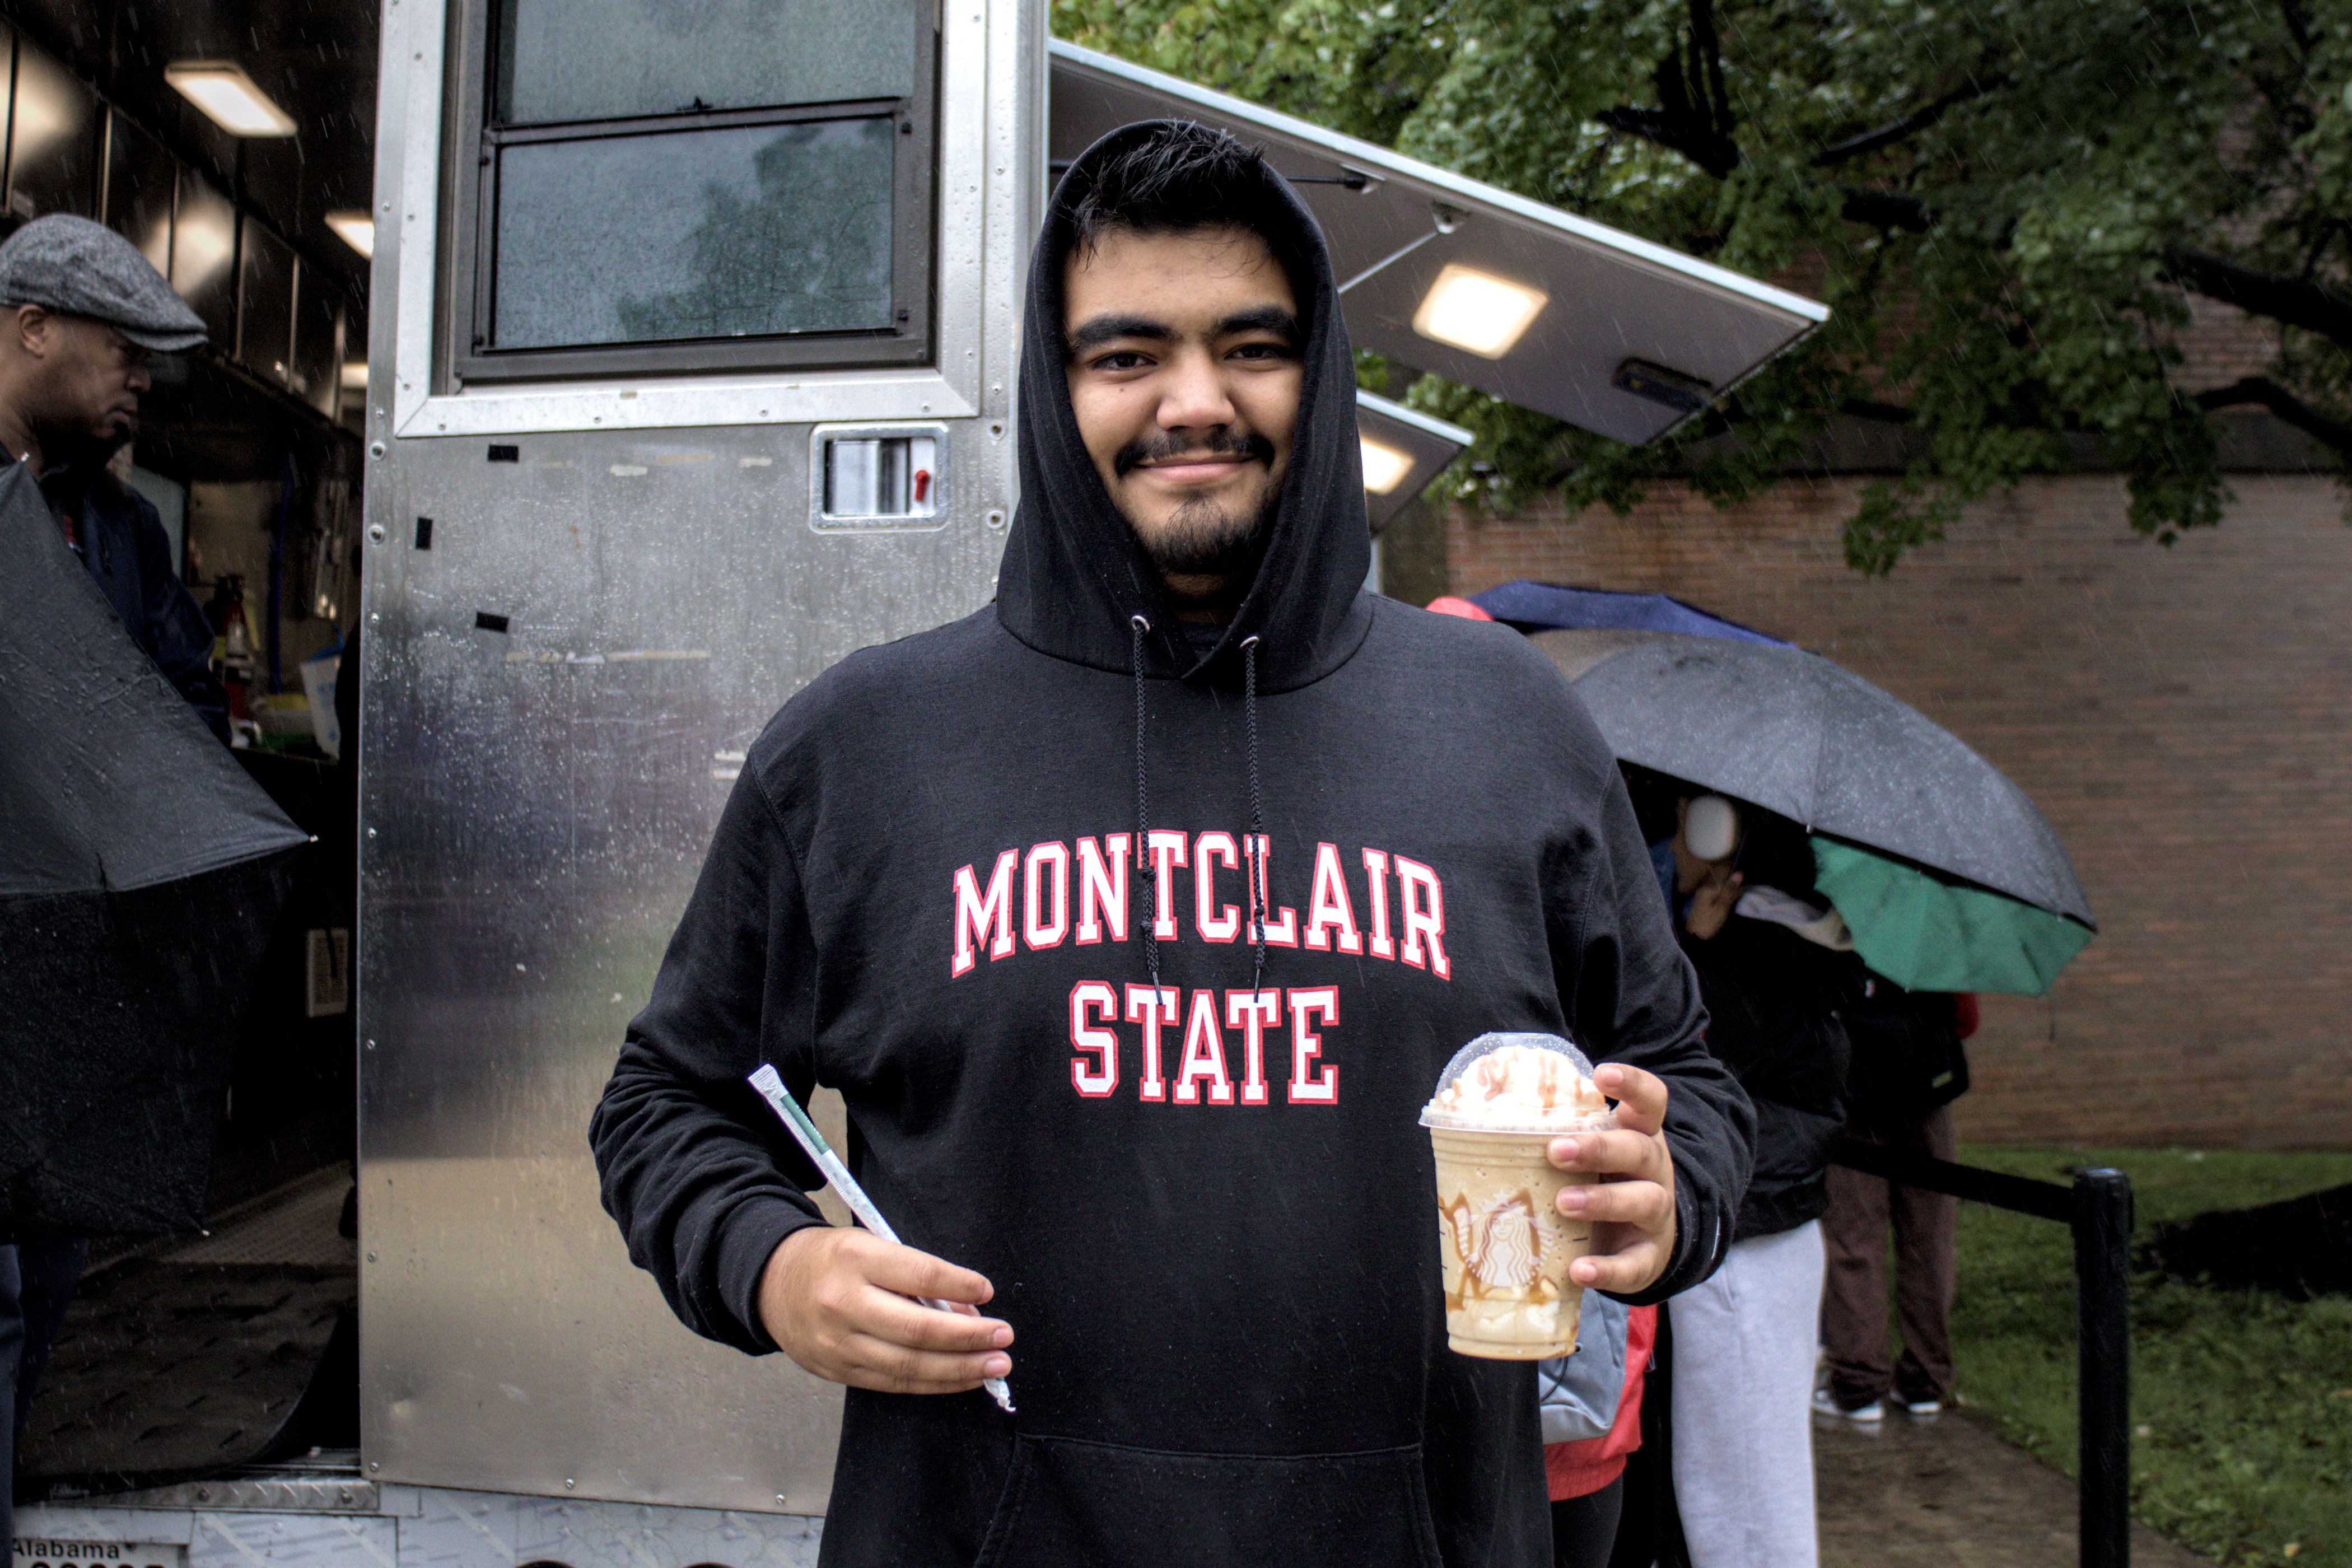 Tall person with black hair tucked into a black and red Montclair State hoodie holds a straw and a Starbucks beverage.